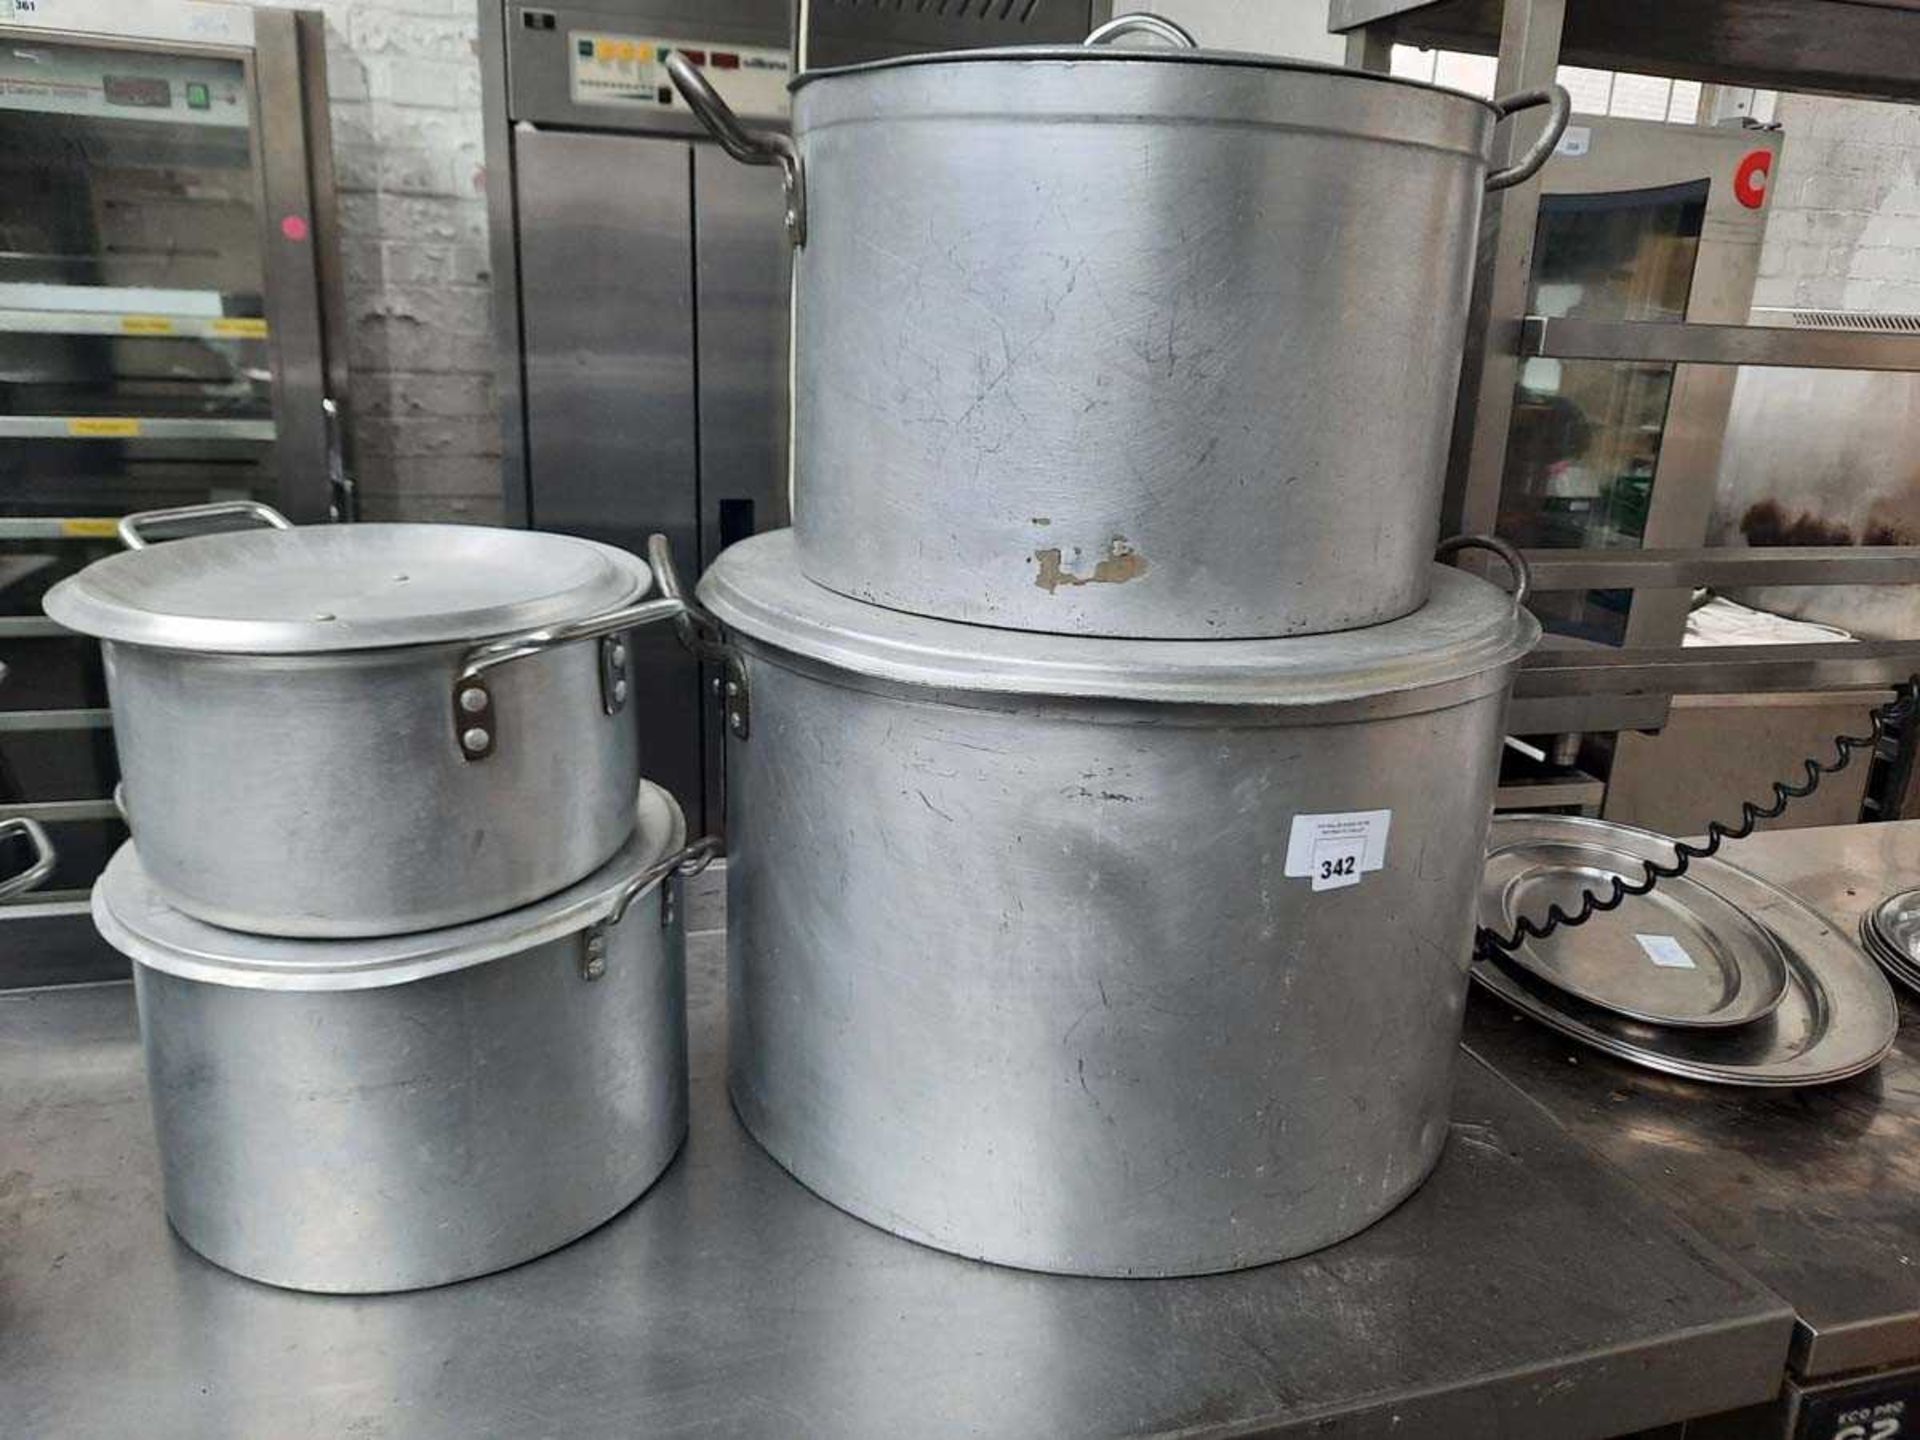 +VAT 4 x large graduated sized aluminium cooking pots with handles and lids